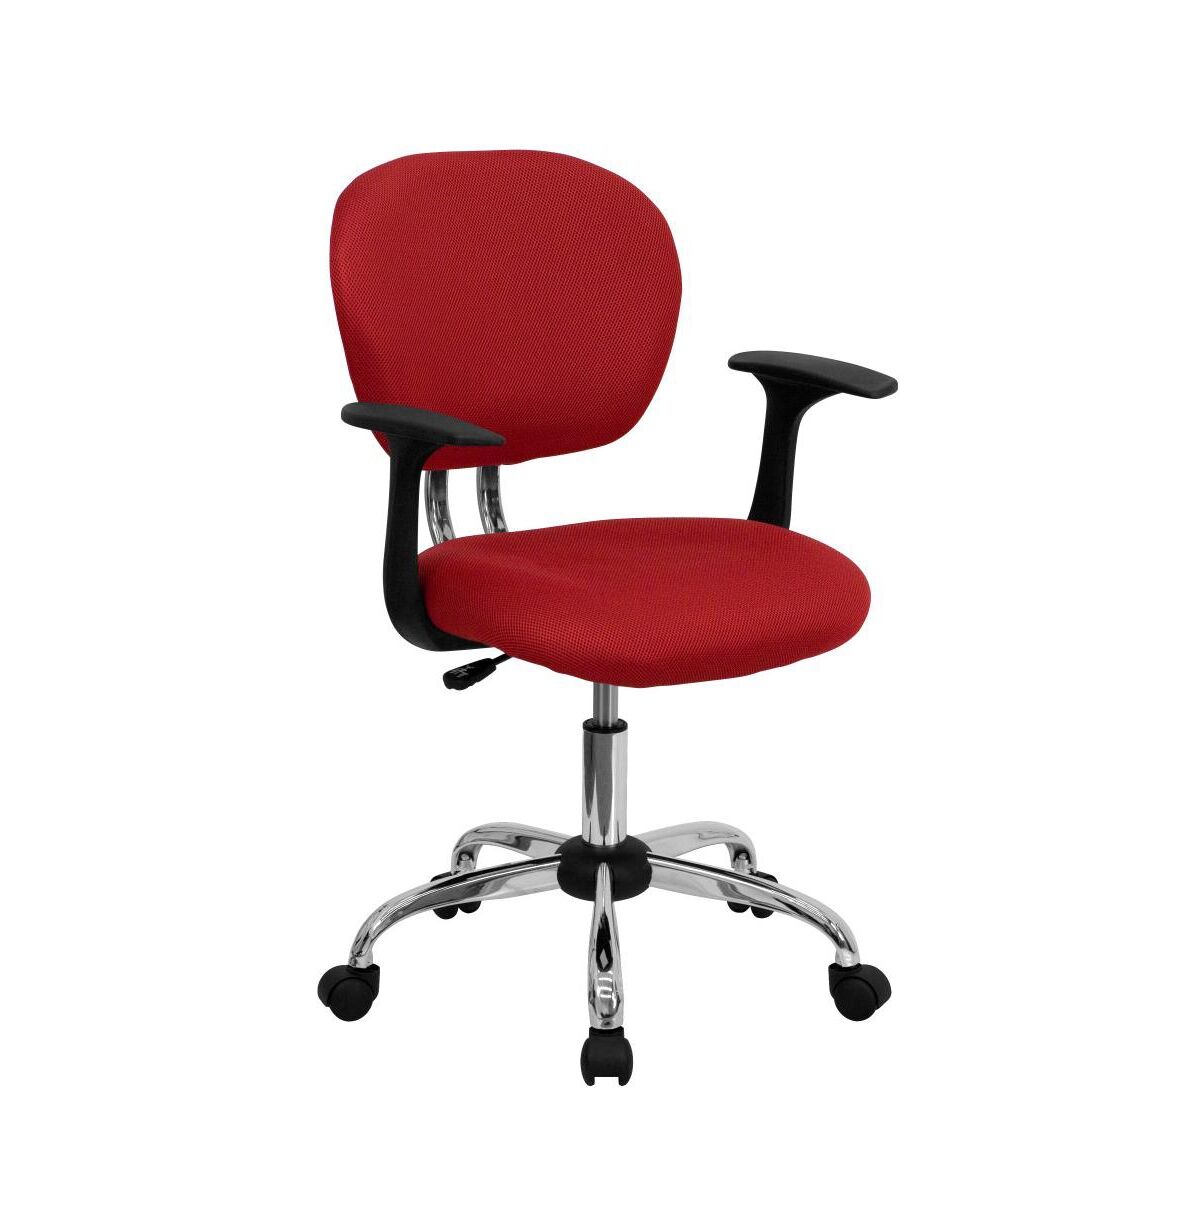 Emma+oliver Mid-Back Mesh Padded Swivel Task Office Chair With Chrome Base And Arms - Red